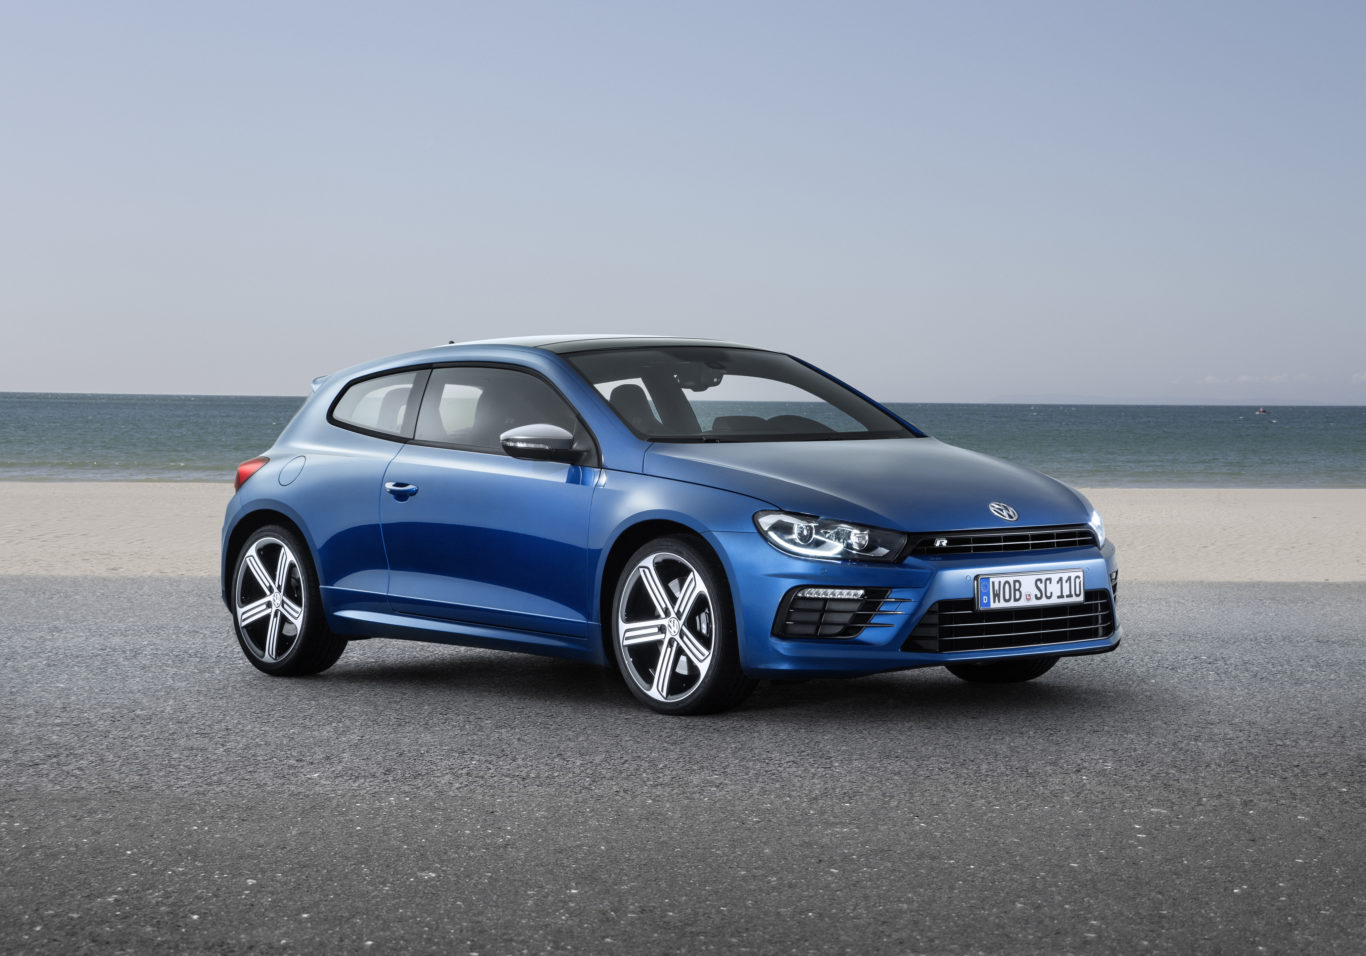 The Scirocco R pushes out 261bhp